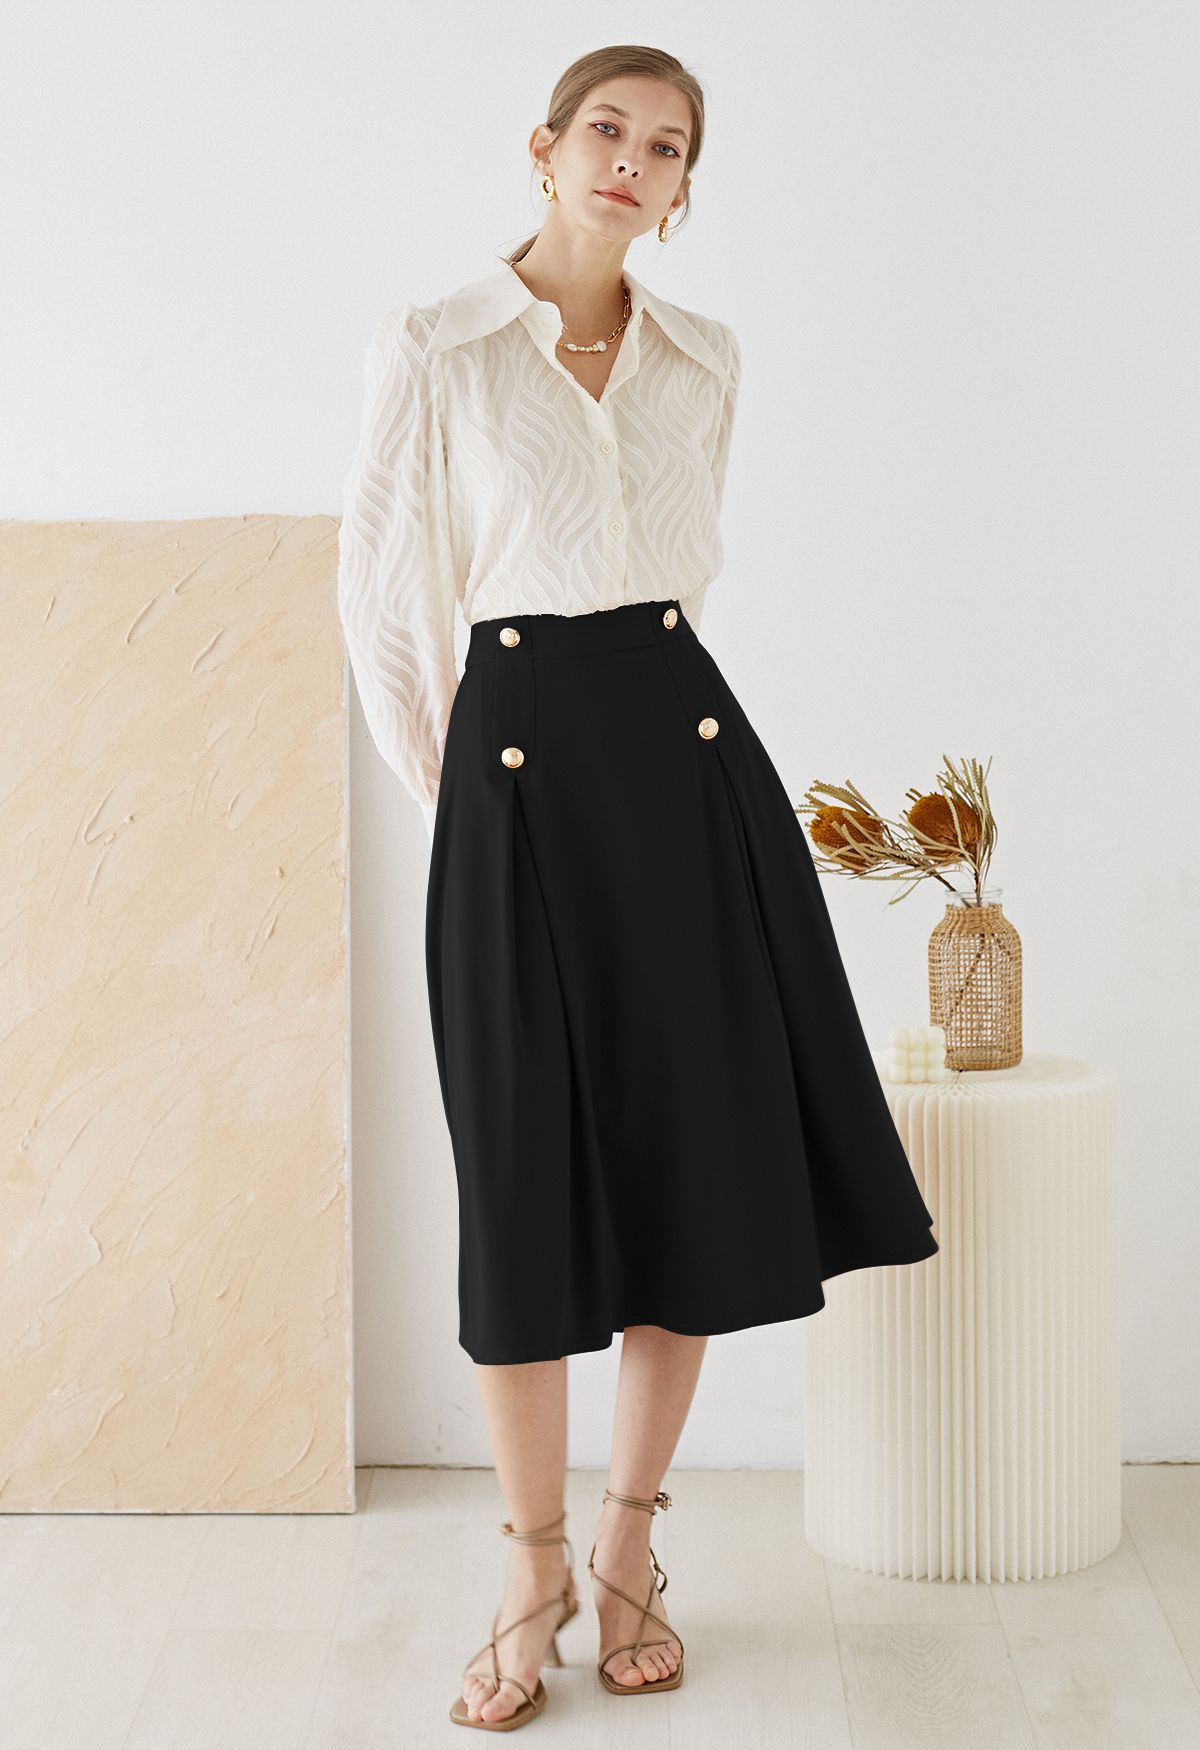 Buttoned Pleated A-Line Skirt in Black